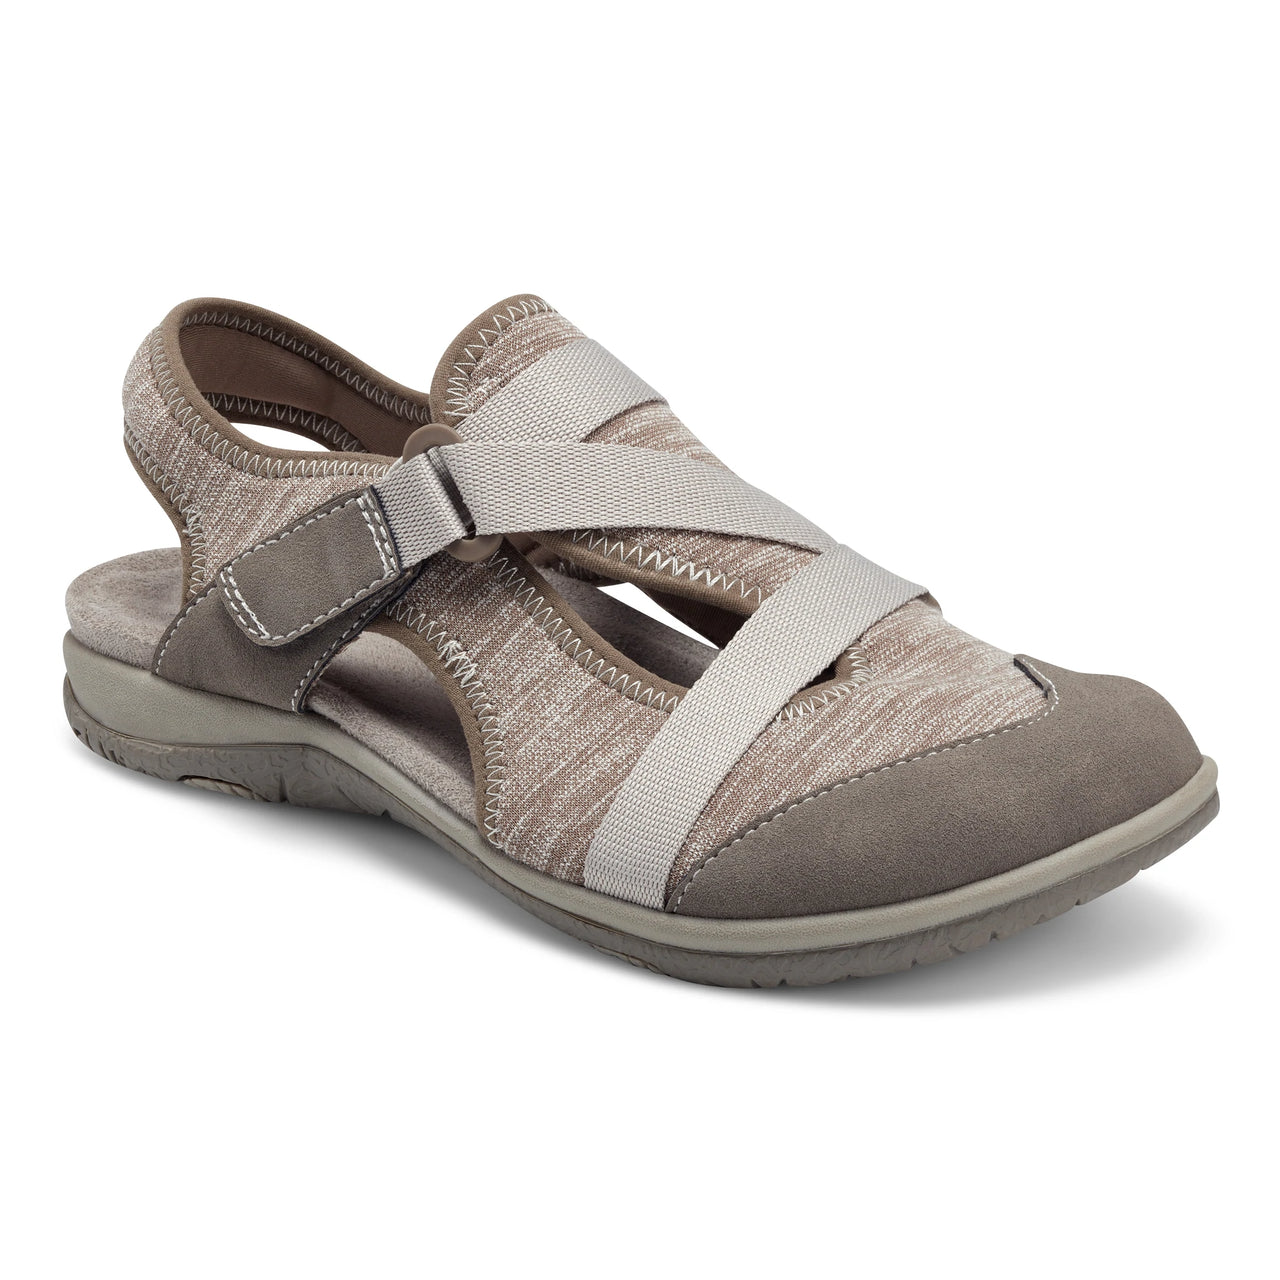 EARTH ORIGINS STACEY - EARTH ORIGINS - Sole Desire Shoes